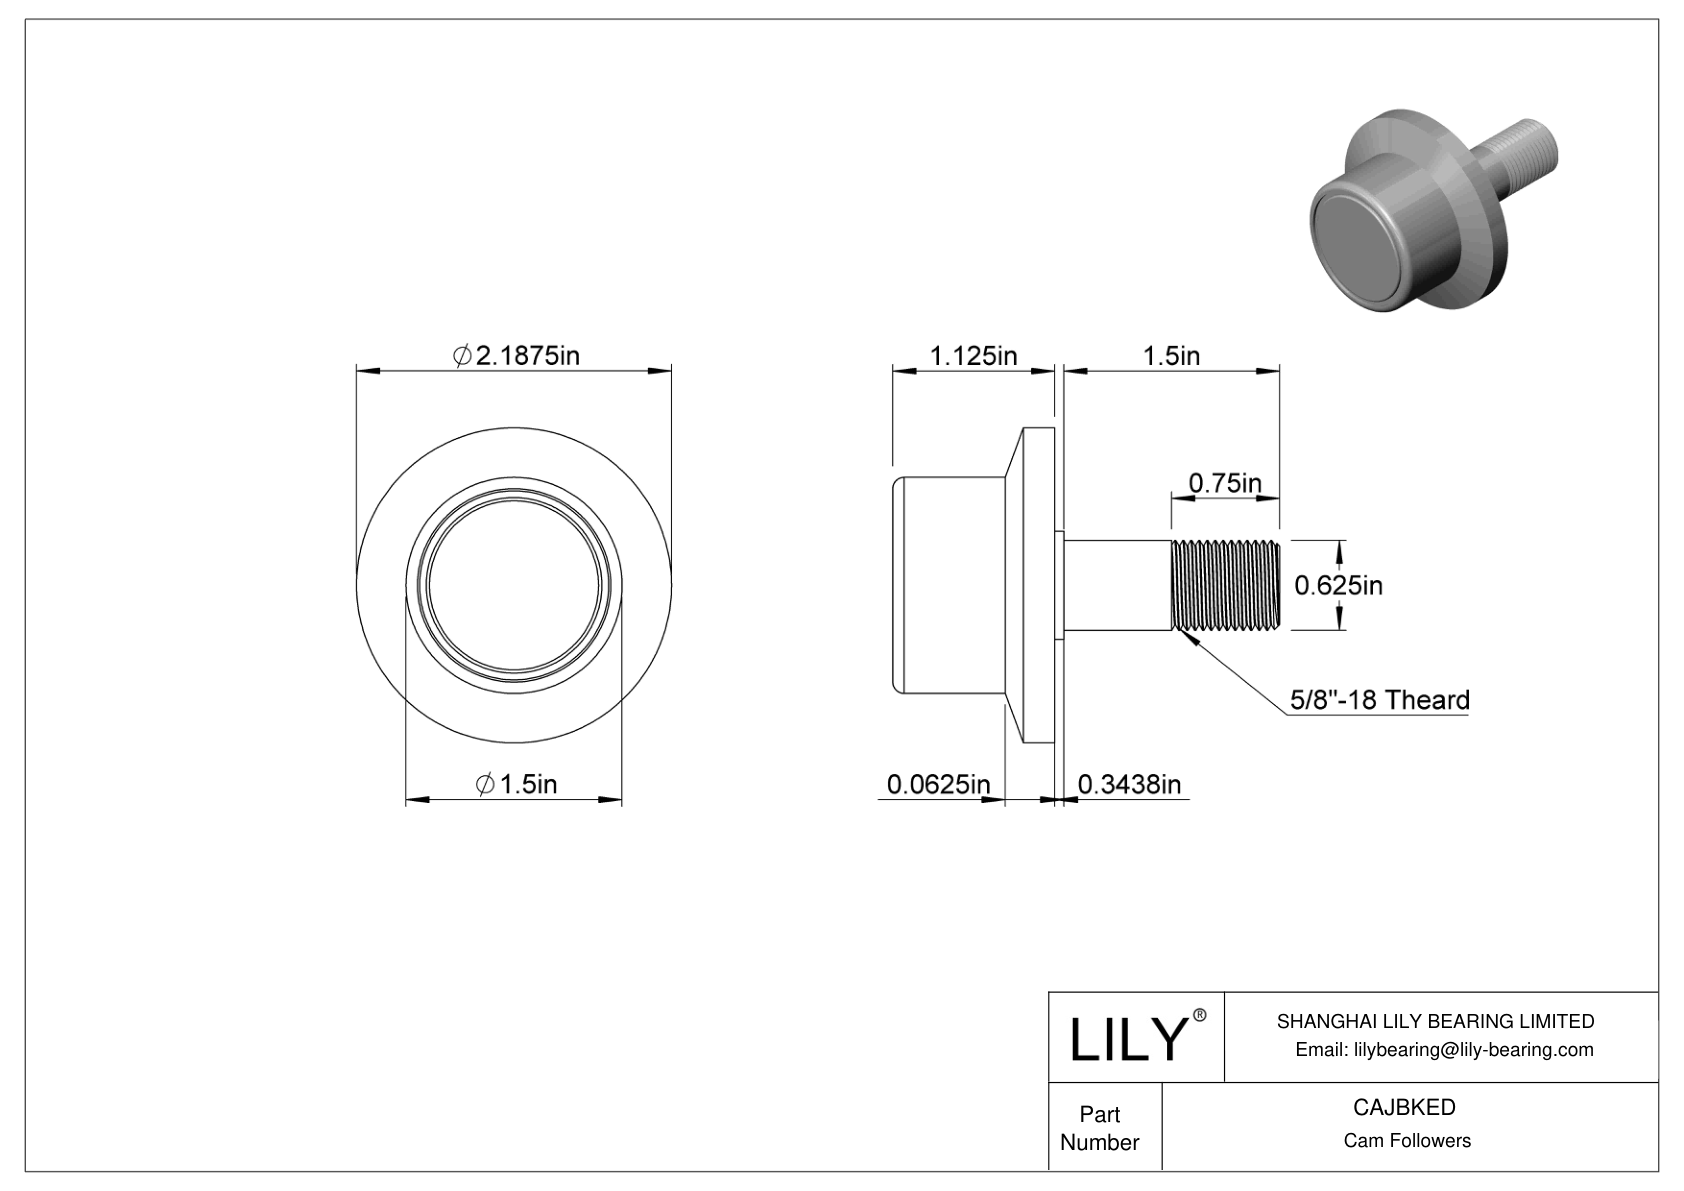 CAJBKED Flanged Threaded Track Rollers cad drawing